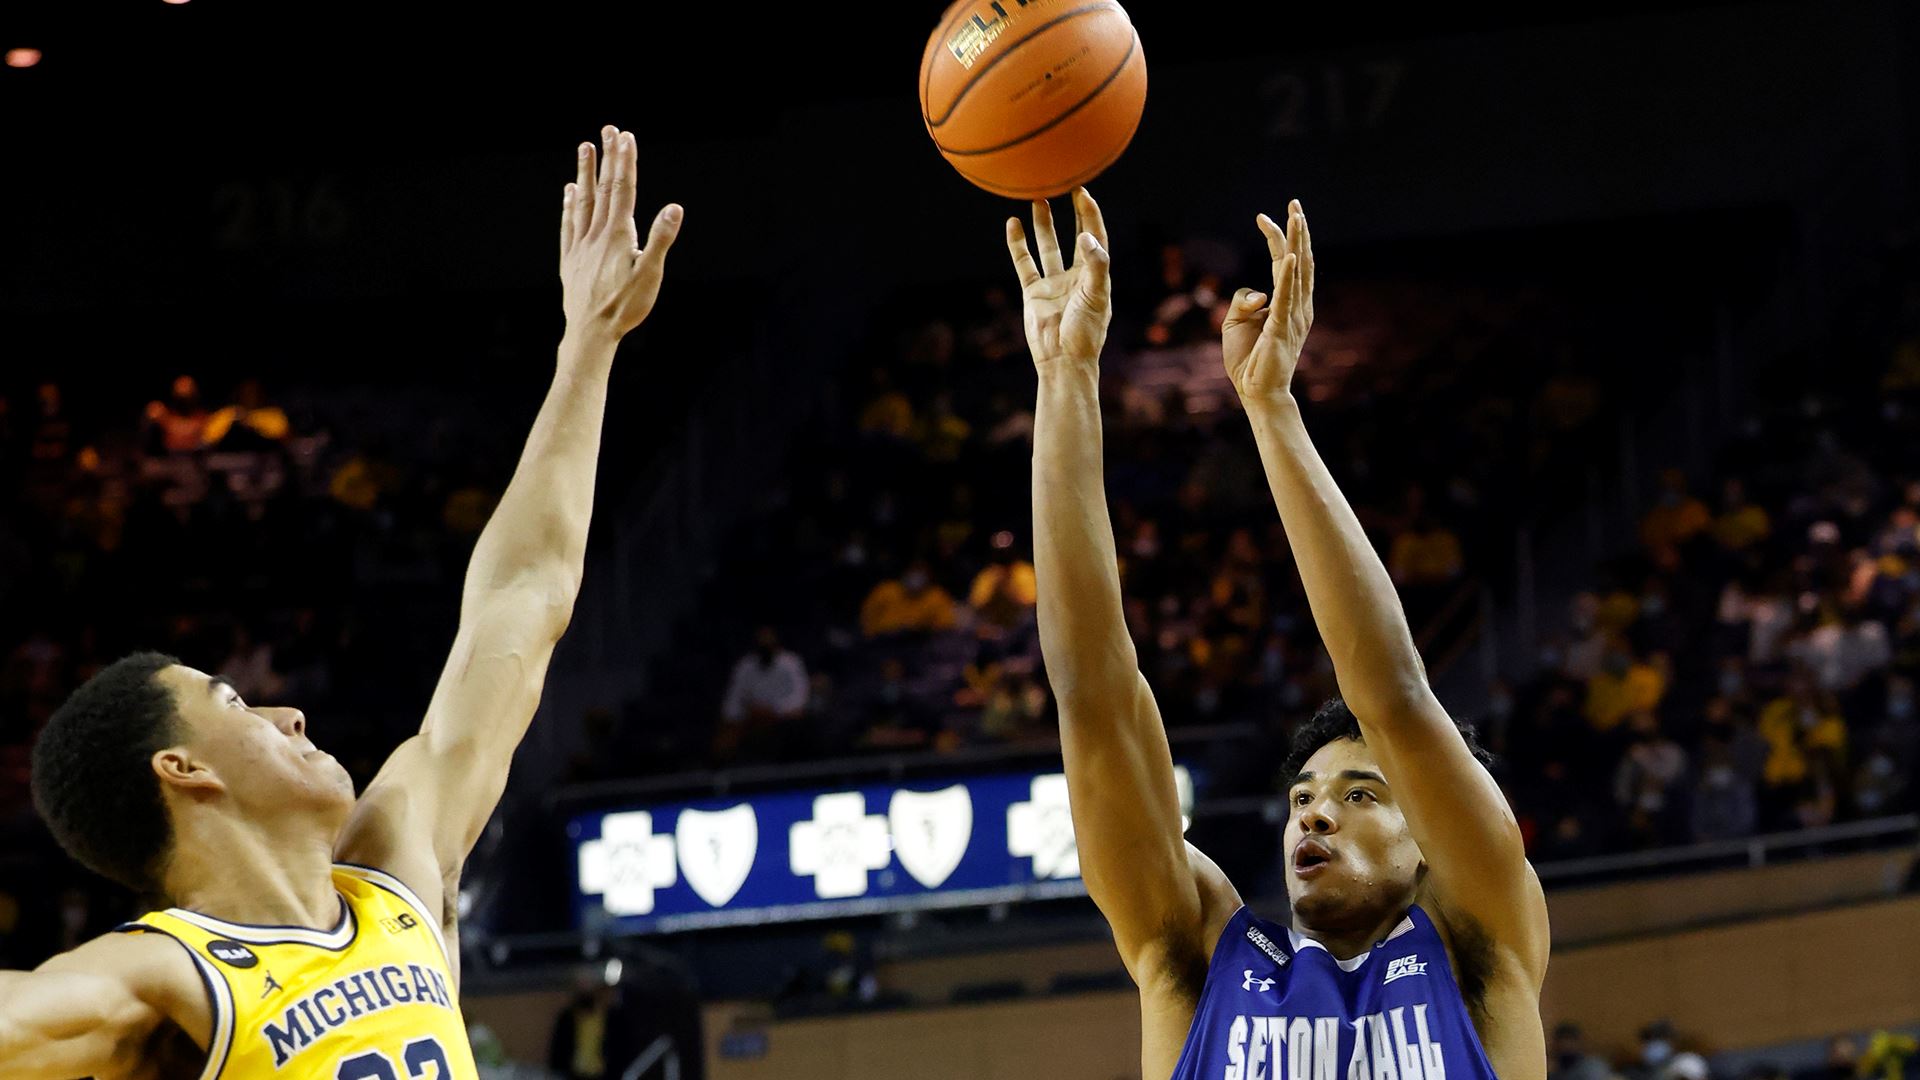 Seton Hall's Jared Rhoden takes a jumpshot during a game against No. 4 Michigan on the road.